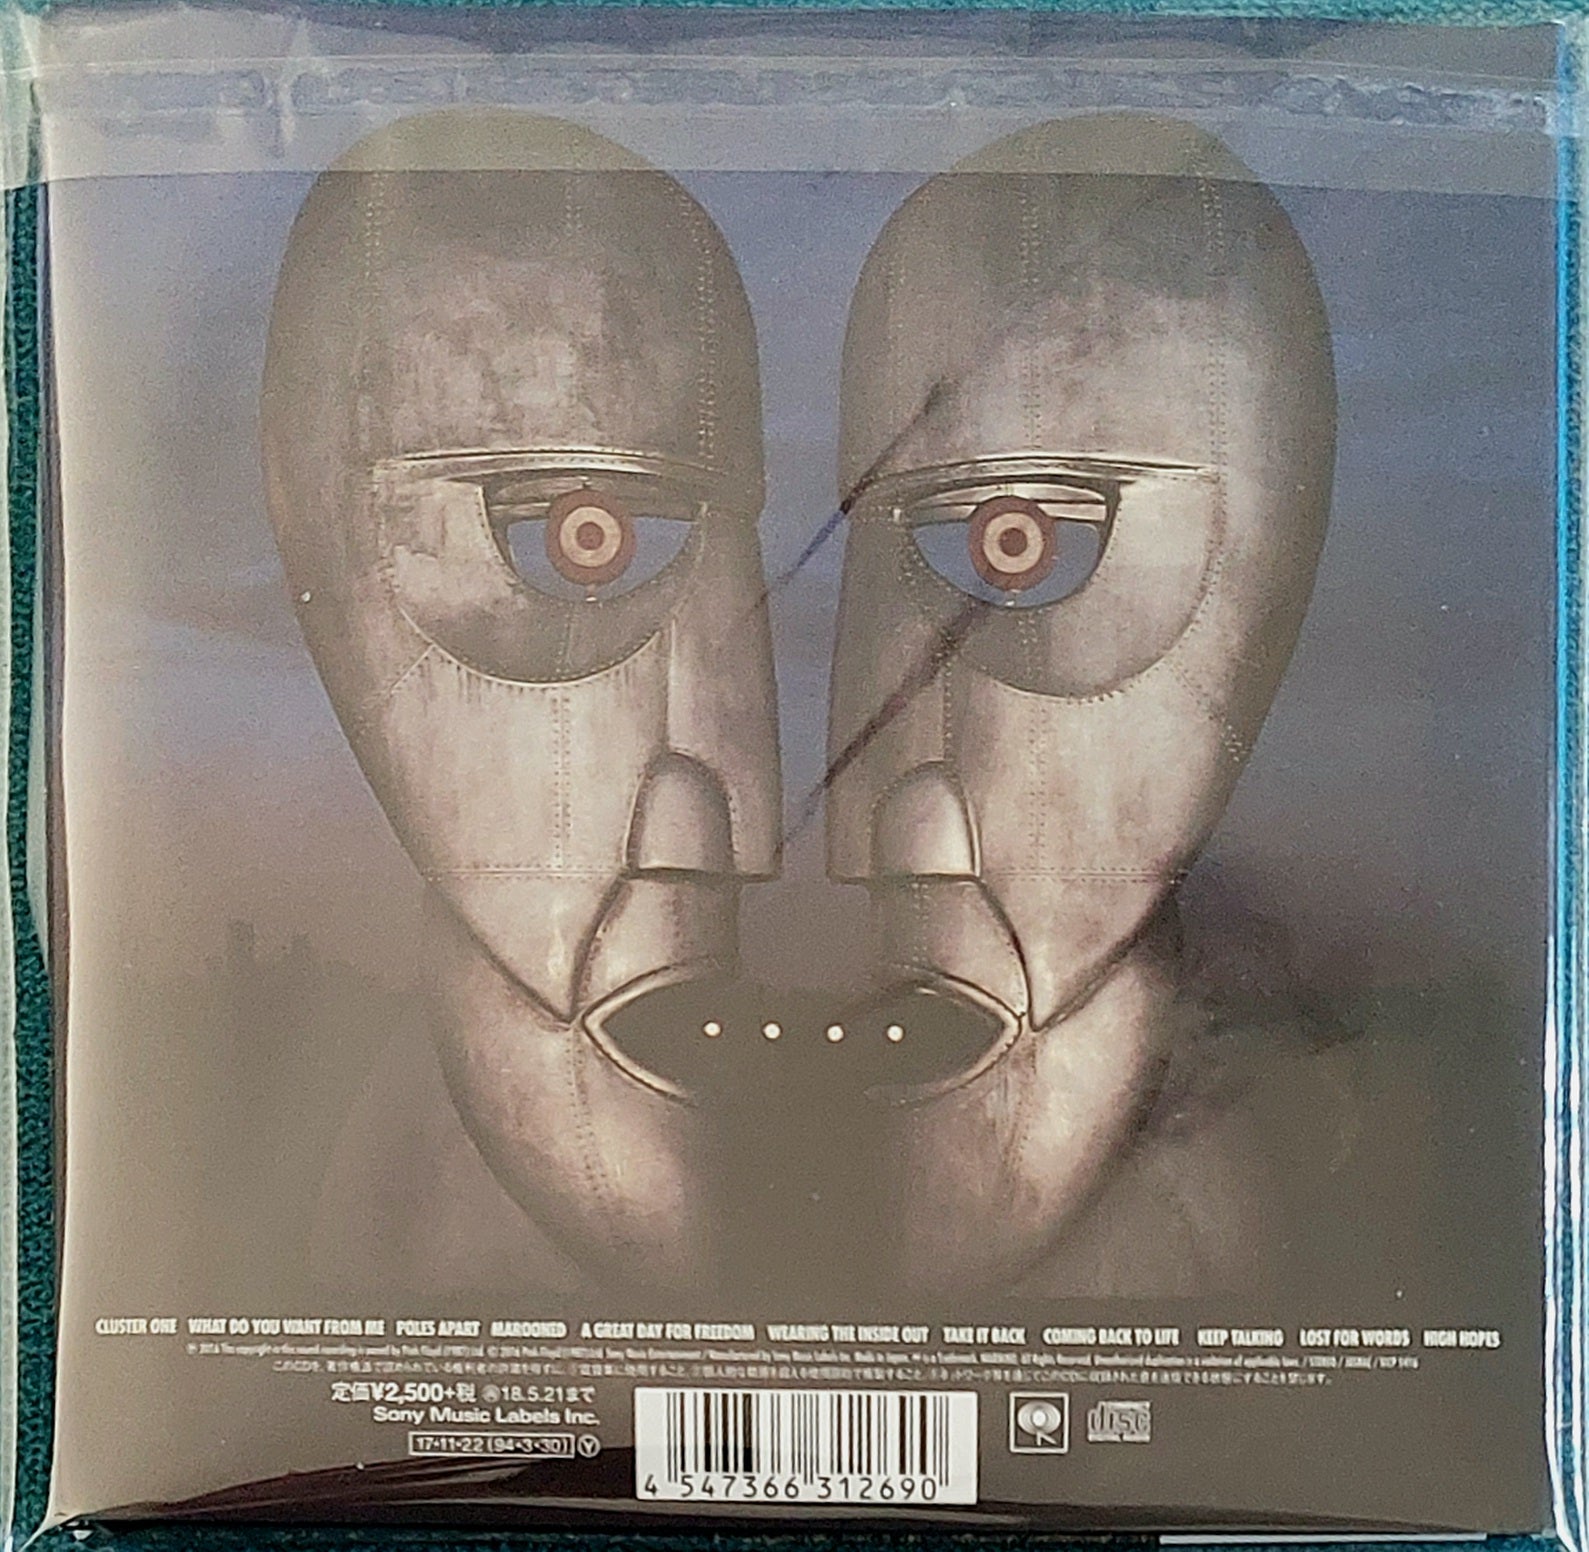 Mini-LP_CD_Protective_Resealable_Sleeves